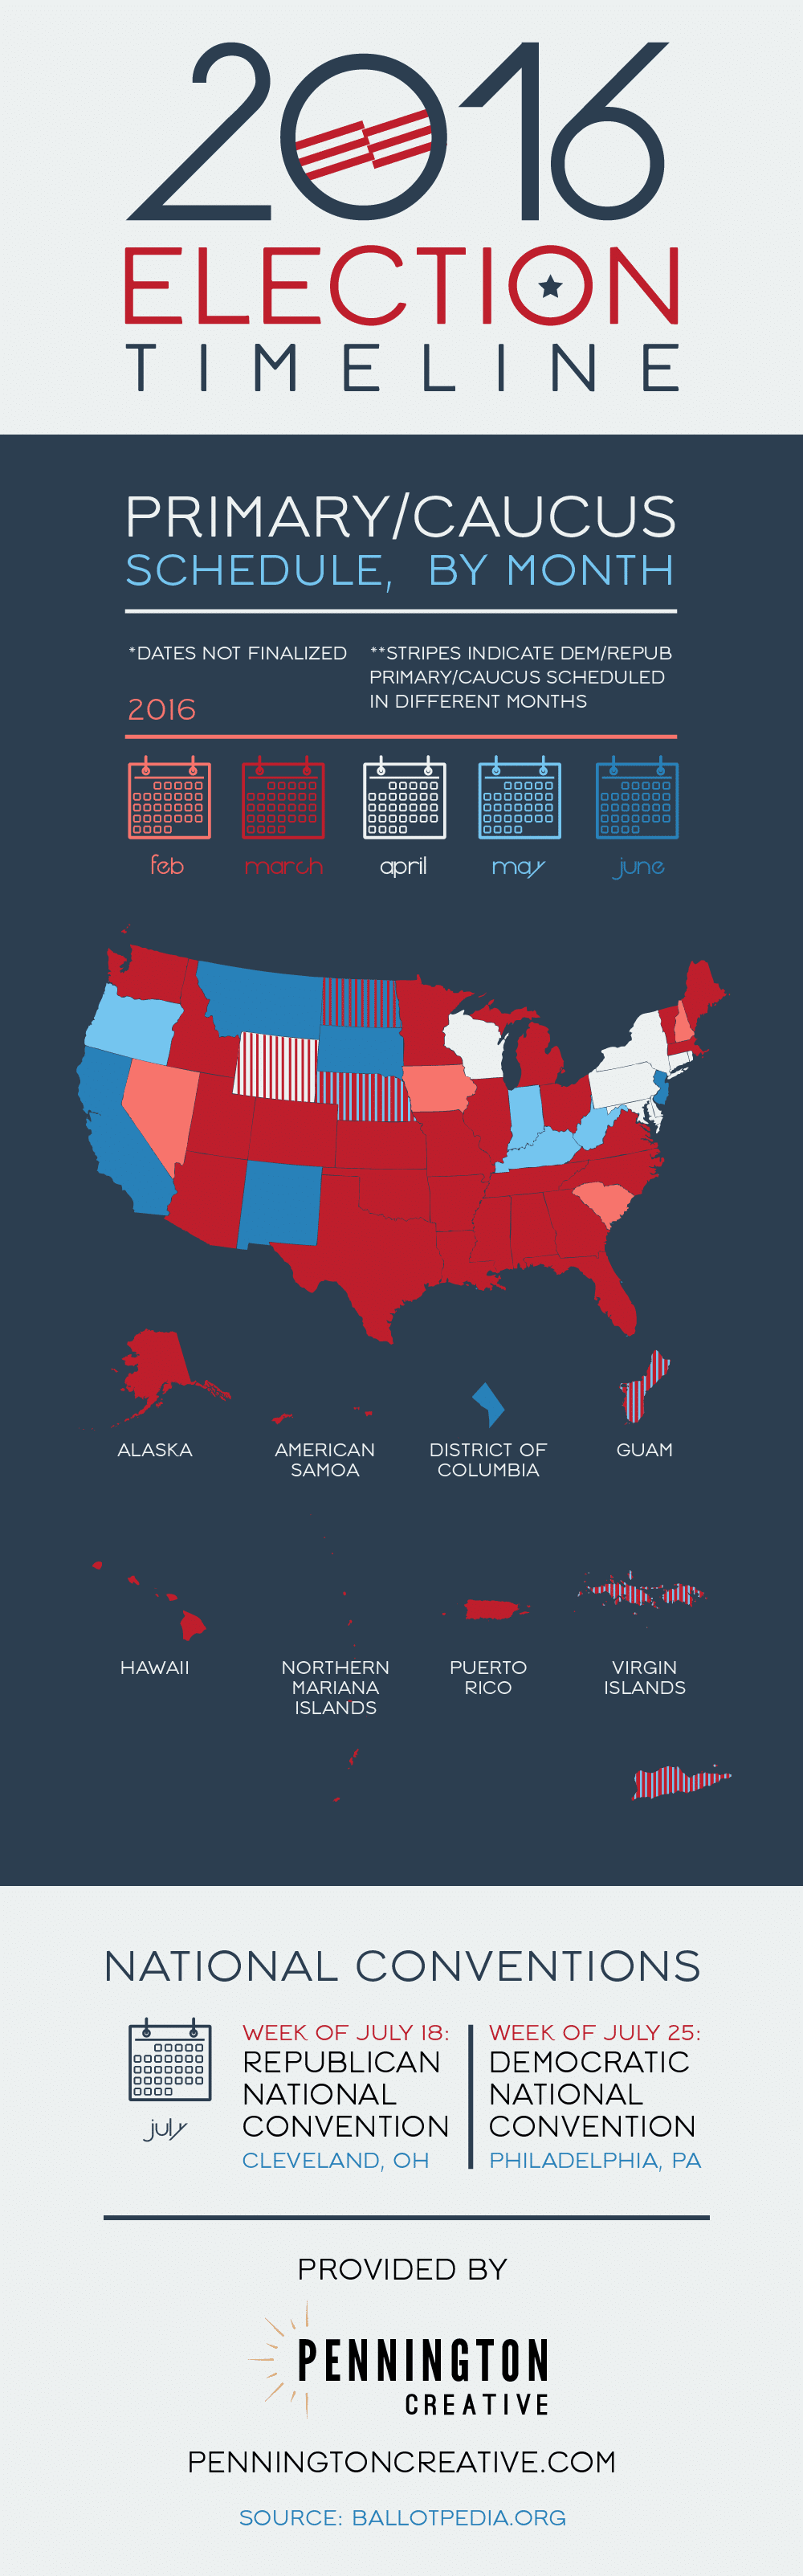 2016 Election Timeline Infographic